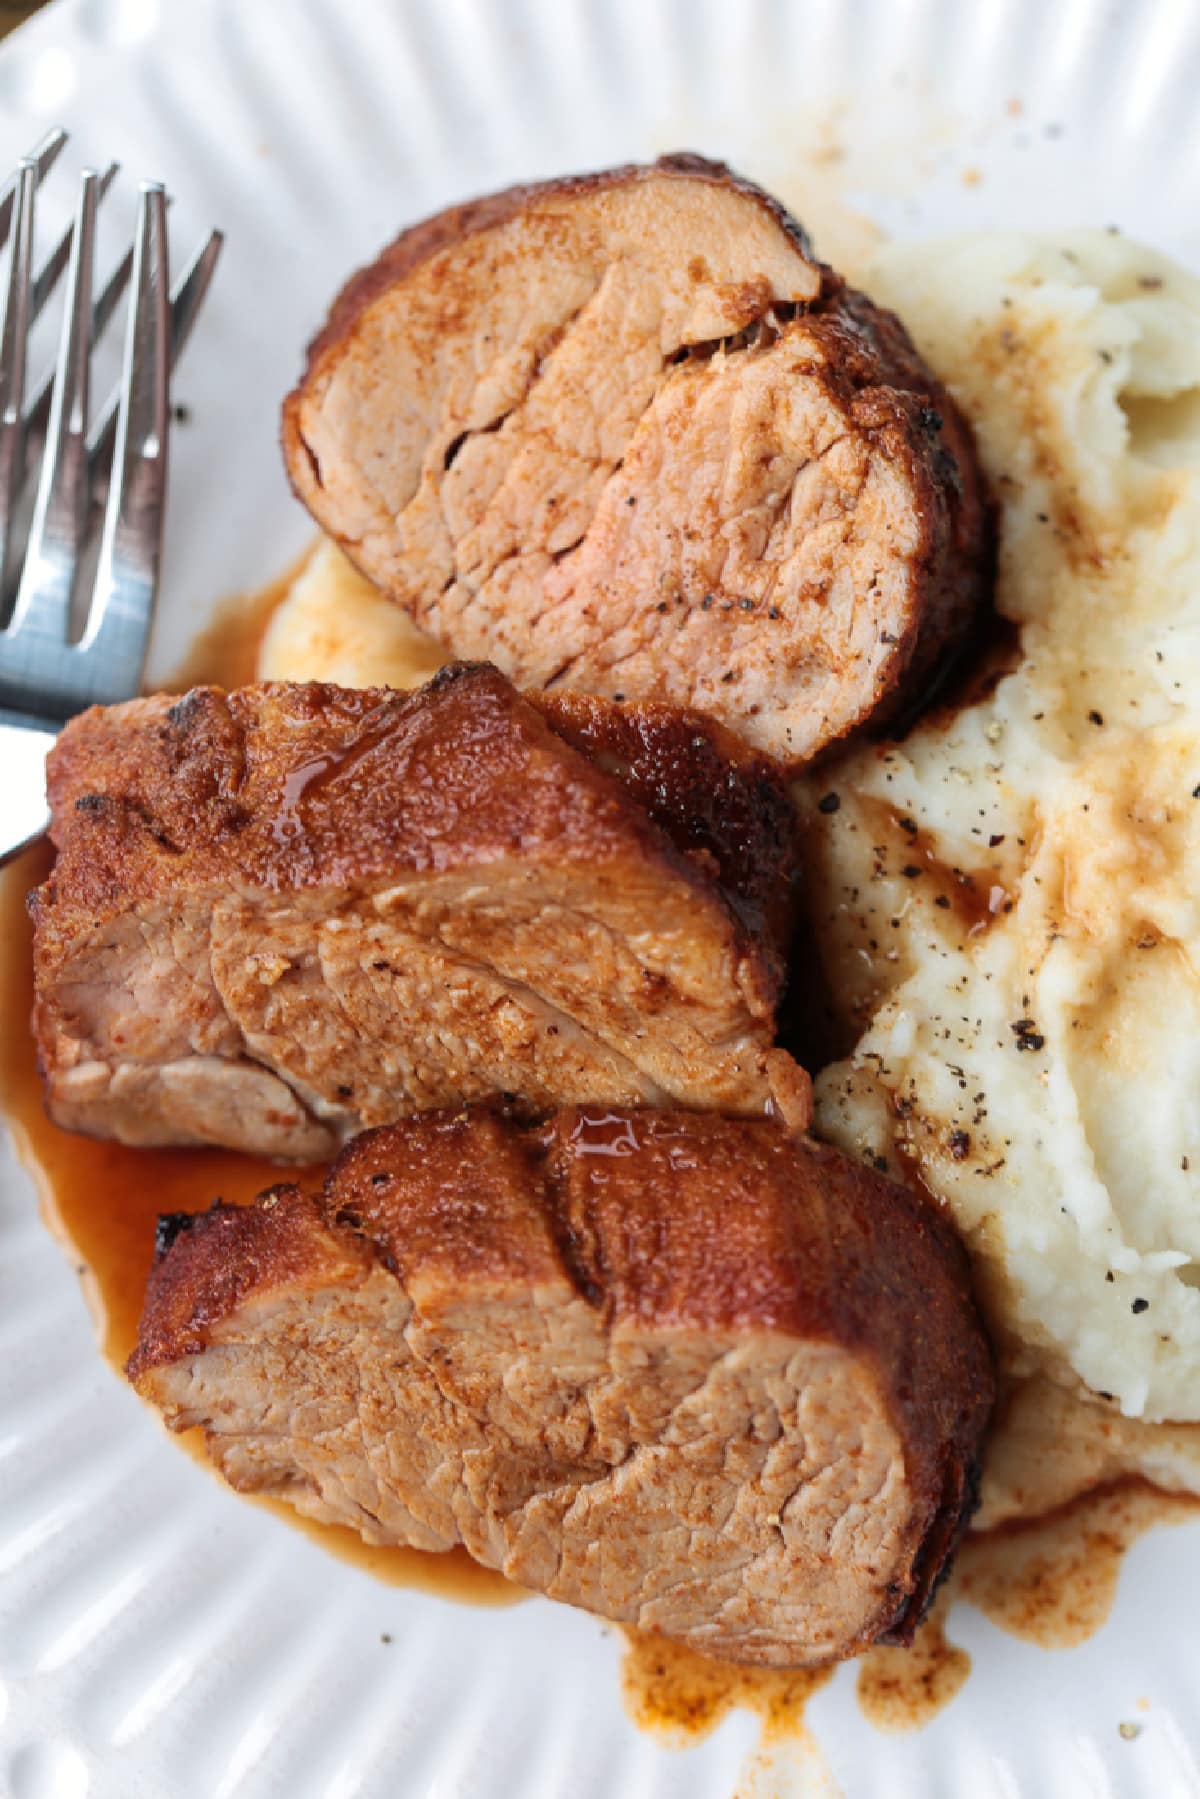 slices of pork tenderloin on plate with potatoes